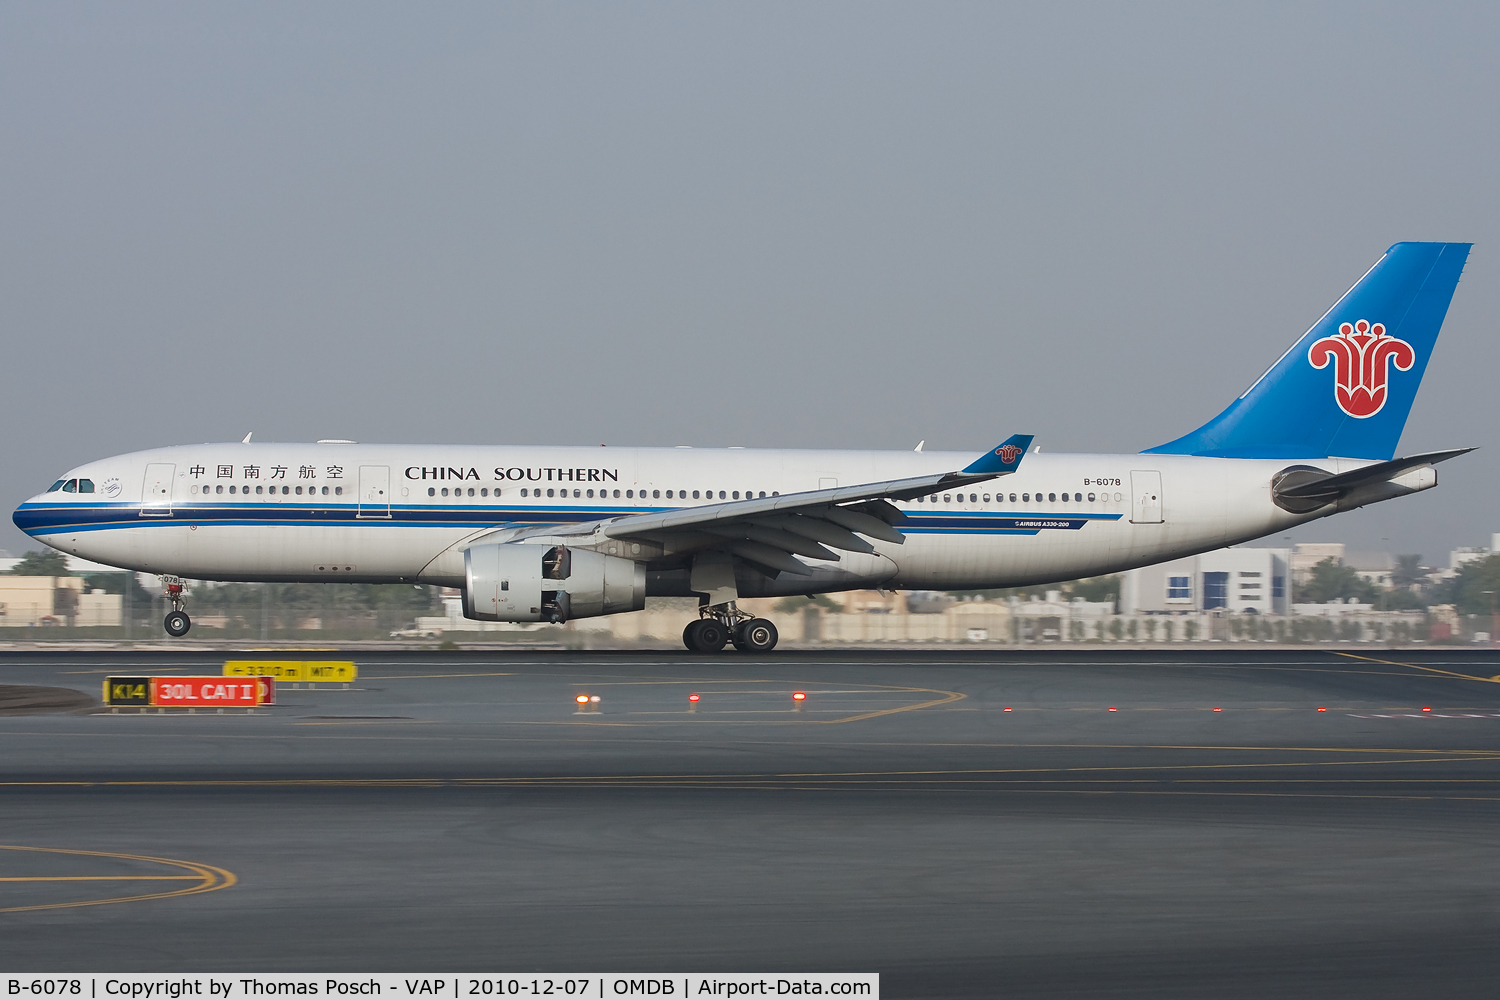 B-6078, 2007 Airbus A330-243 C/N 840, China Southern Airlines